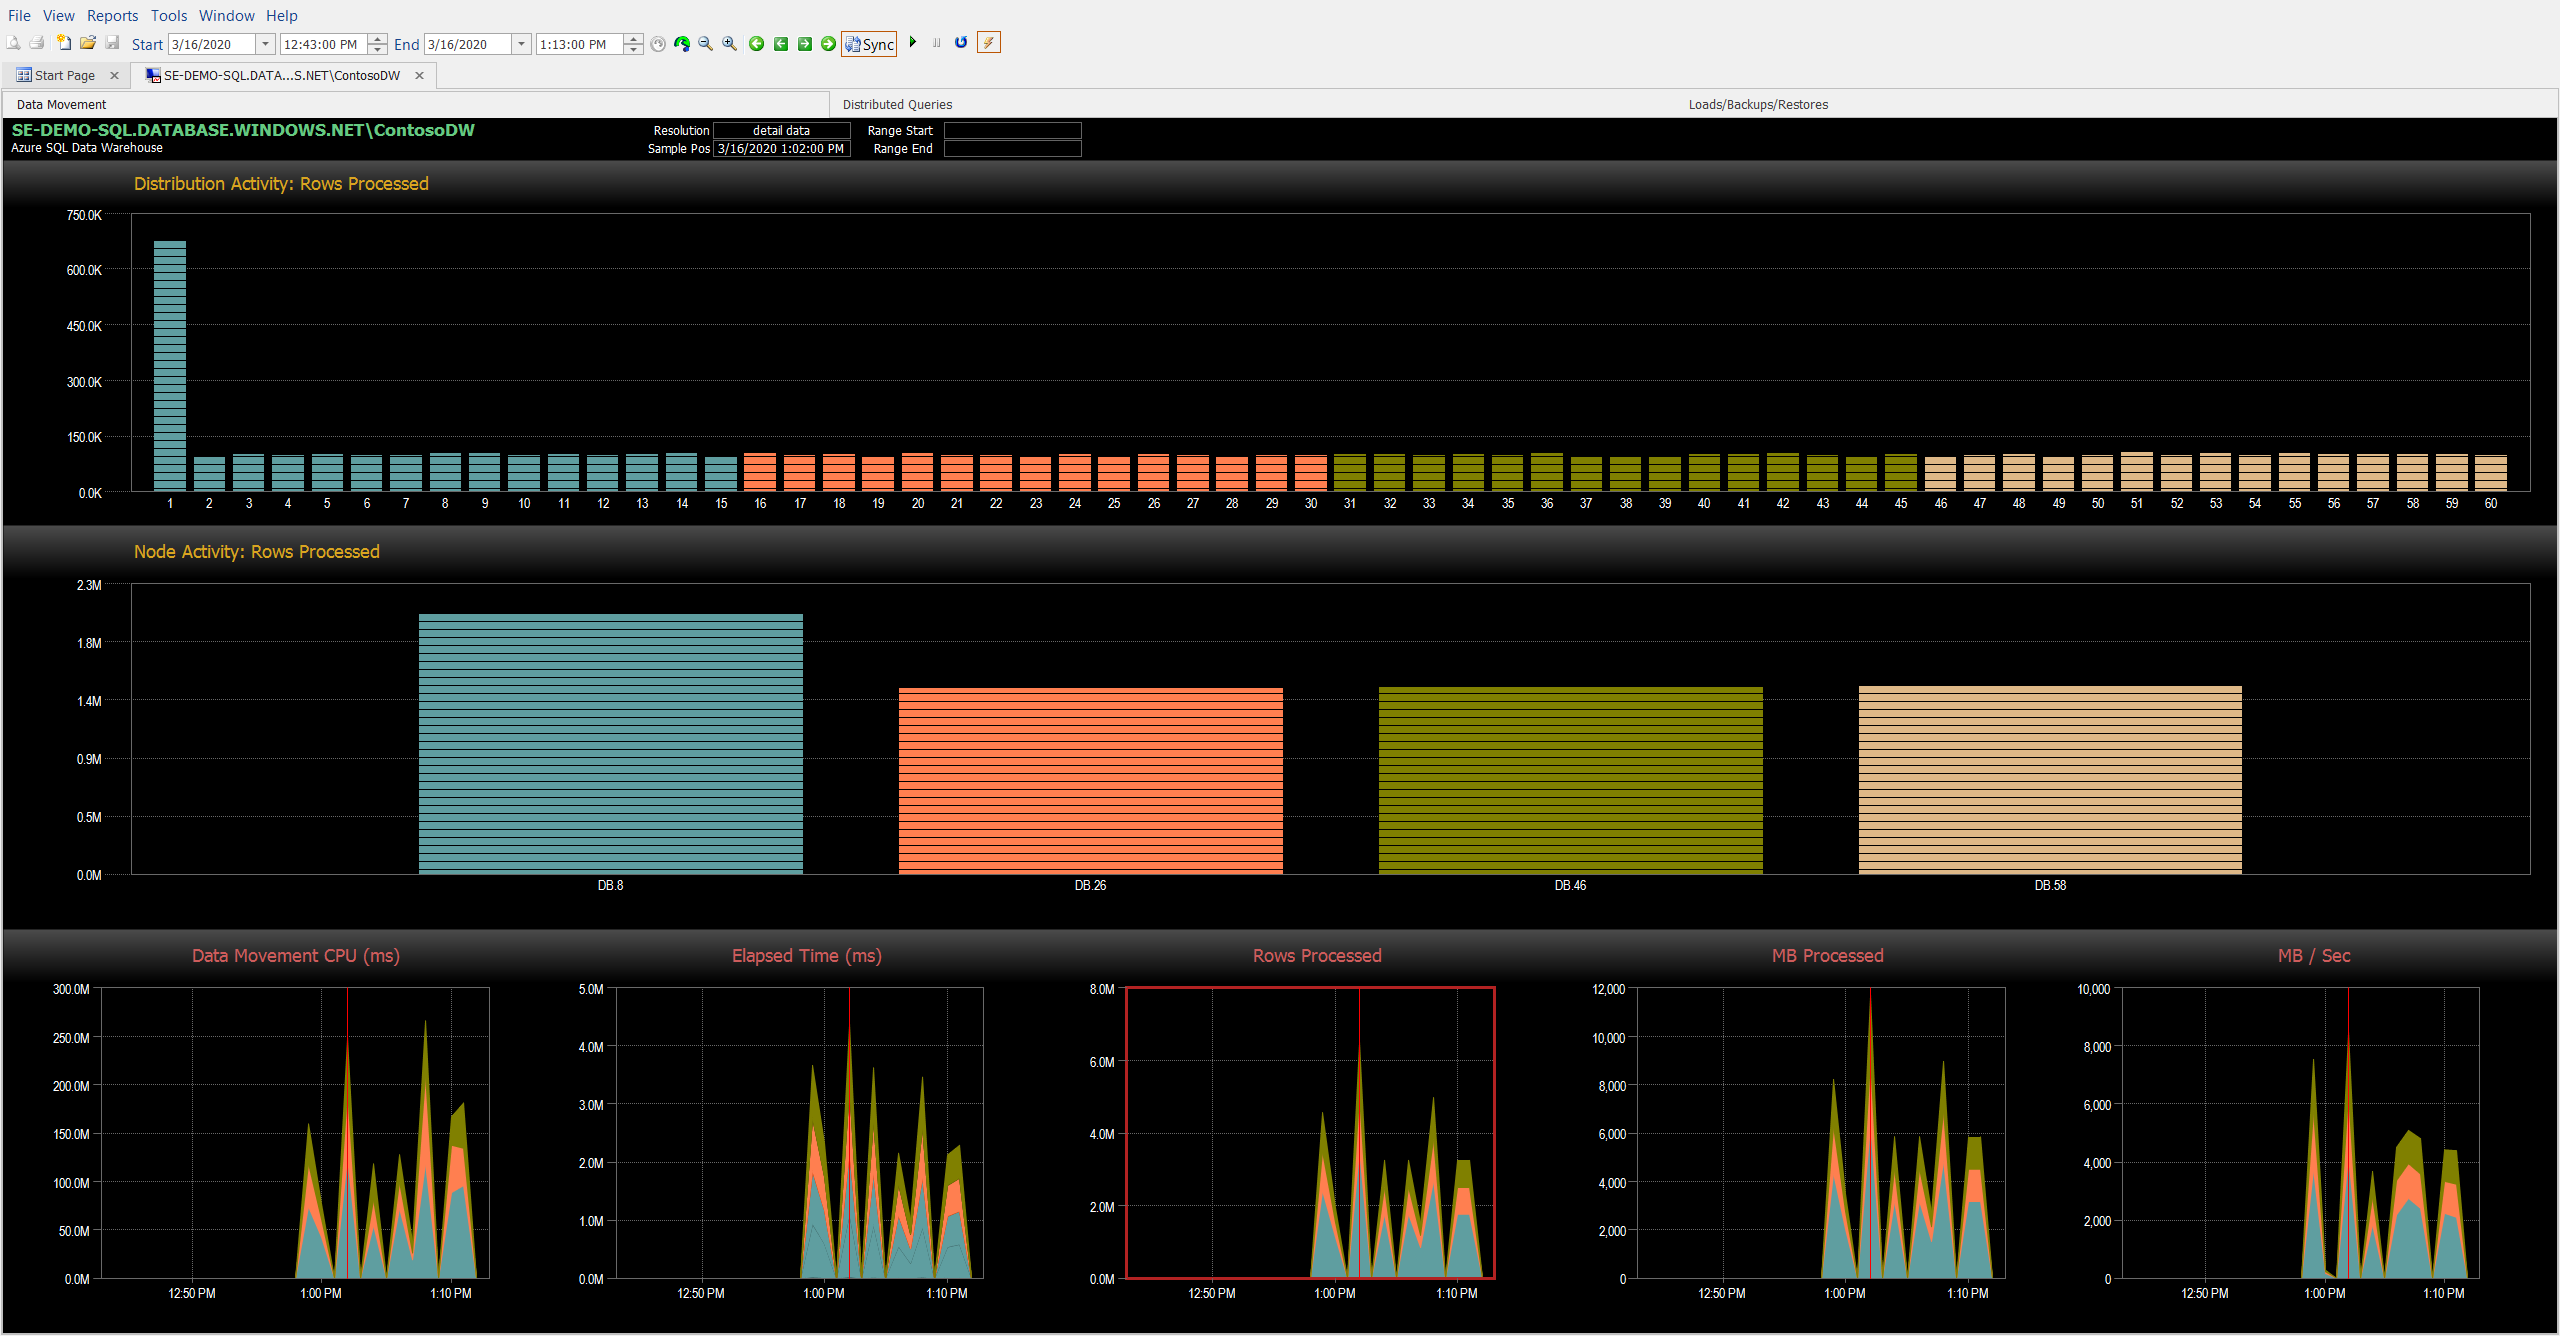 DW Sentry Data Movement Dashboard related graphs